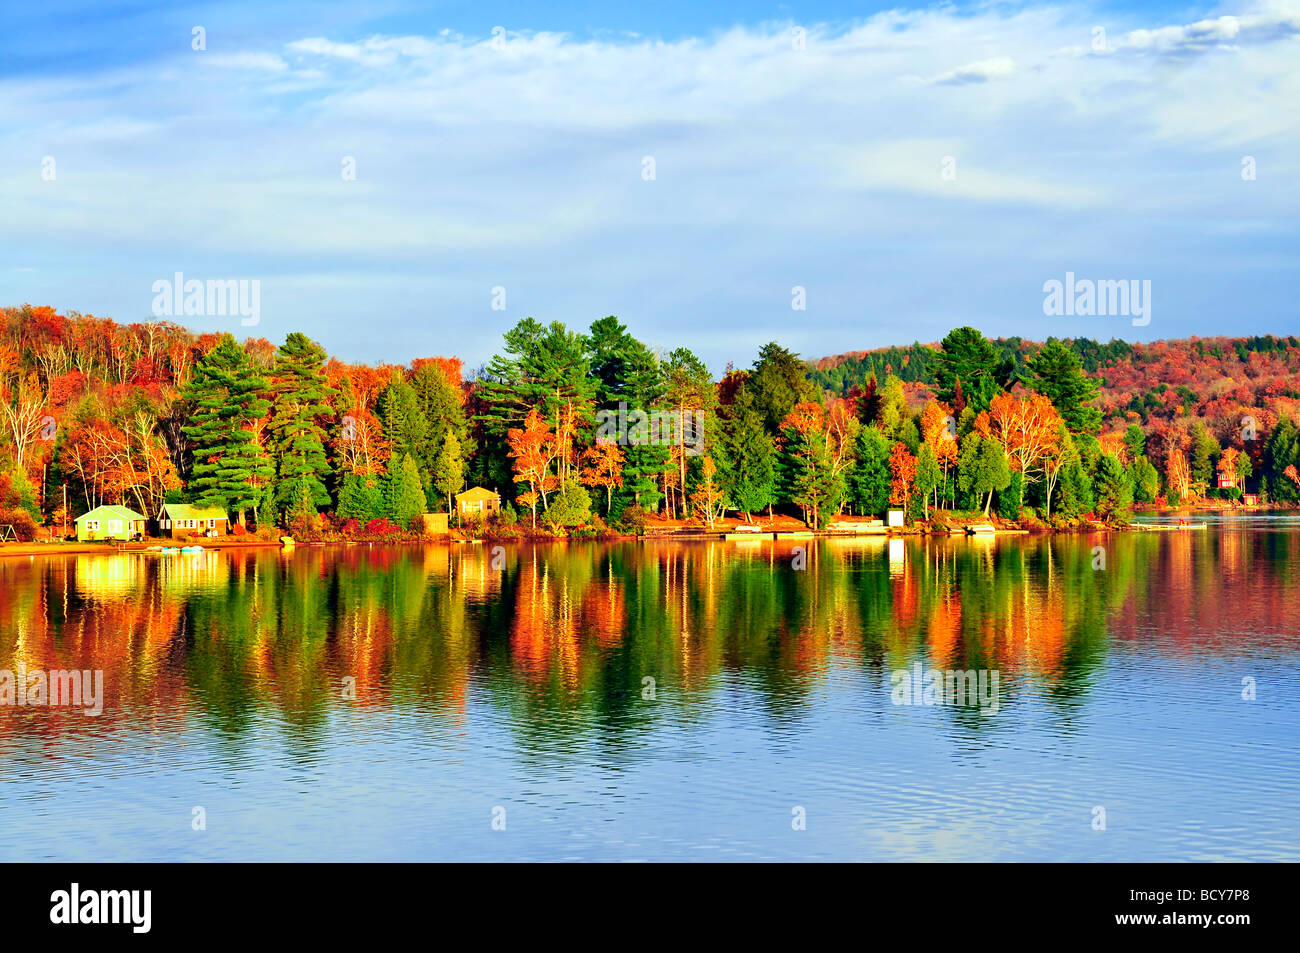 Forest of colorful autumn trees reflecting in calm lake Stock Photo